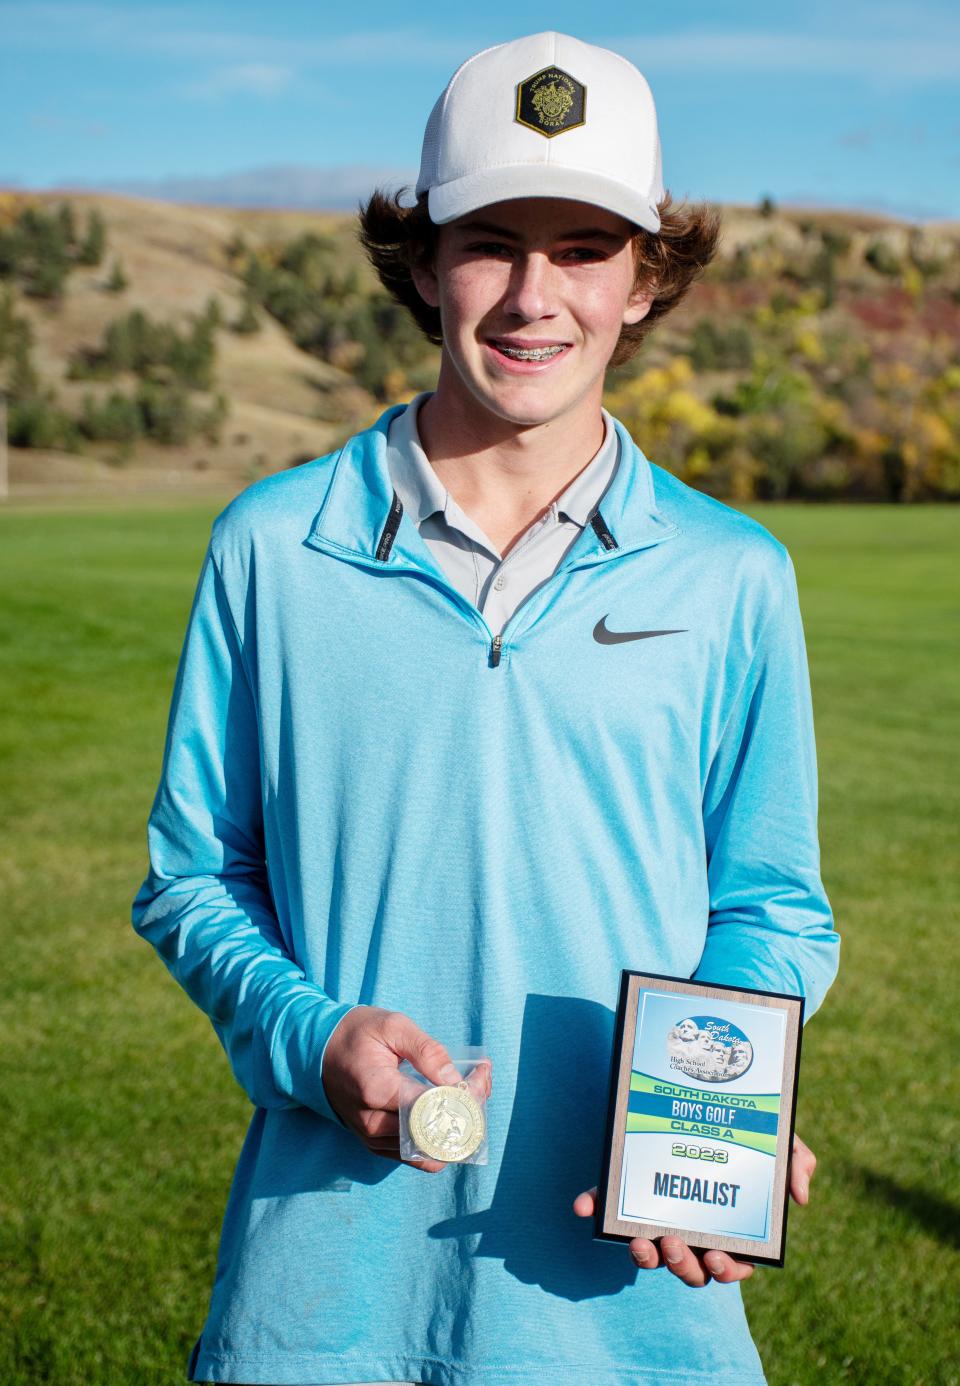 Junior Anthony Lanham of West Central won the individual title in the state Class A high school boys golf tournament that wrapped up on Tuesday, Oct. 3, 2023 at the Hart Ranch Golf Course in Rapid City. Lanham shot a 1-under 143 over the two days and won by two shots.